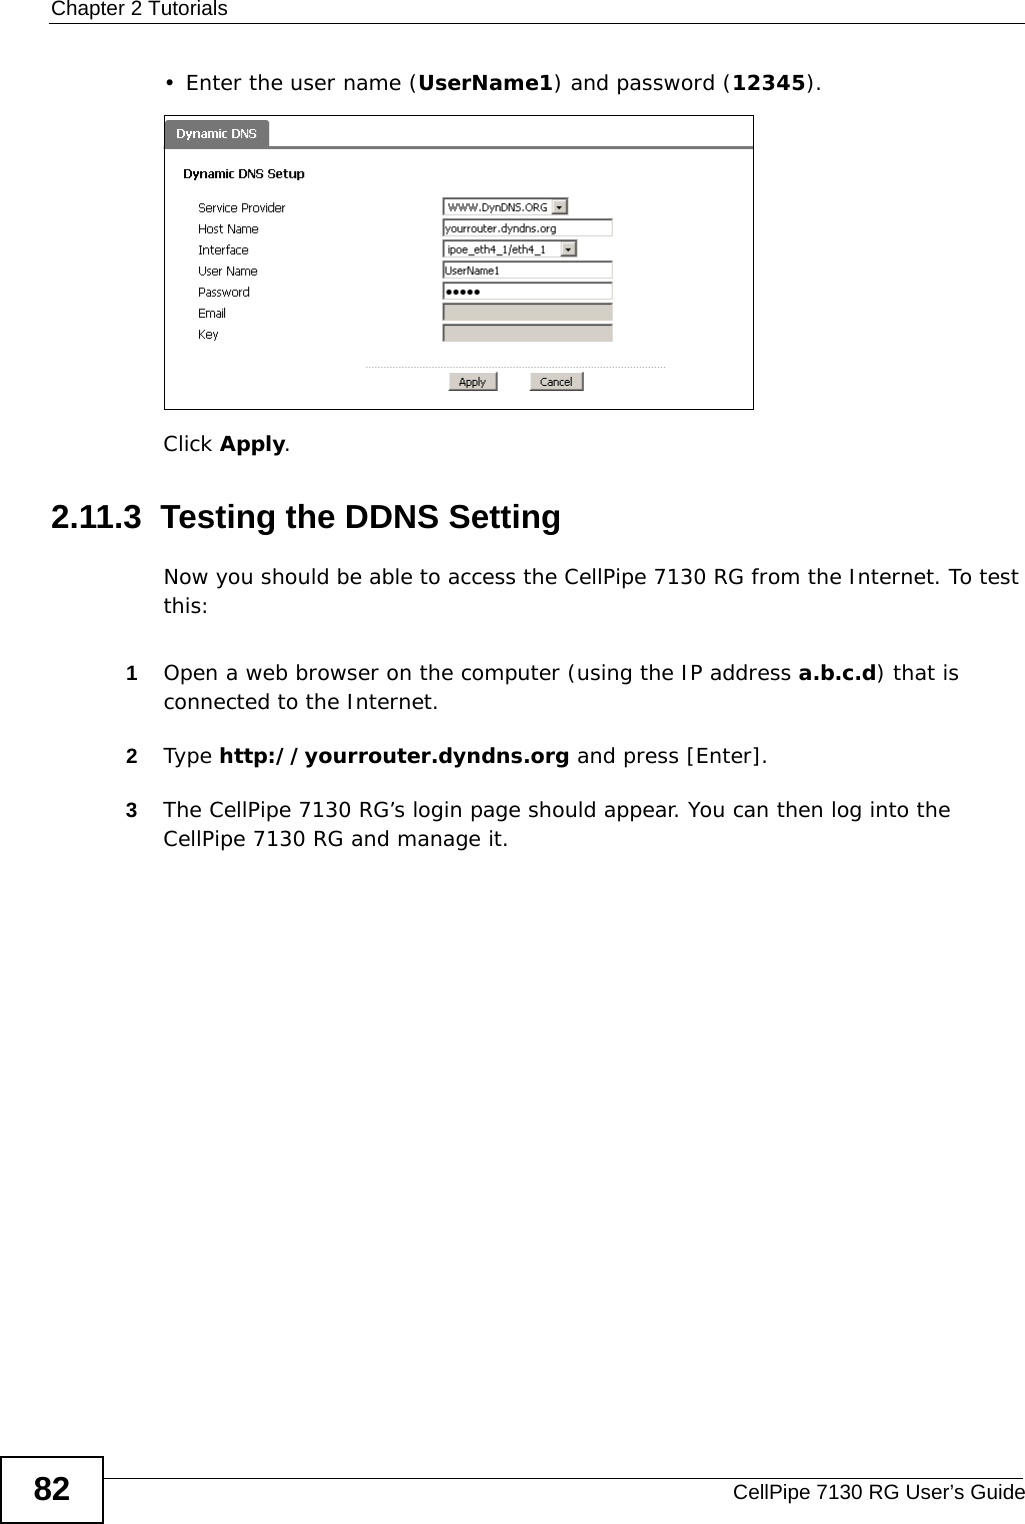 Chapter 2 TutorialsCellPipe 7130 RG User’s Guide82• Enter the user name (UserName1) and password (12345).Click Apply.2.11.3  Testing the DDNS SettingNow you should be able to access the CellPipe 7130 RG from the Internet. To test this:1Open a web browser on the computer (using the IP address a.b.c.d) that is connected to the Internet.2Type http://yourrouter.dyndns.org and press [Enter].3The CellPipe 7130 RG’s login page should appear. You can then log into the CellPipe 7130 RG and manage it.